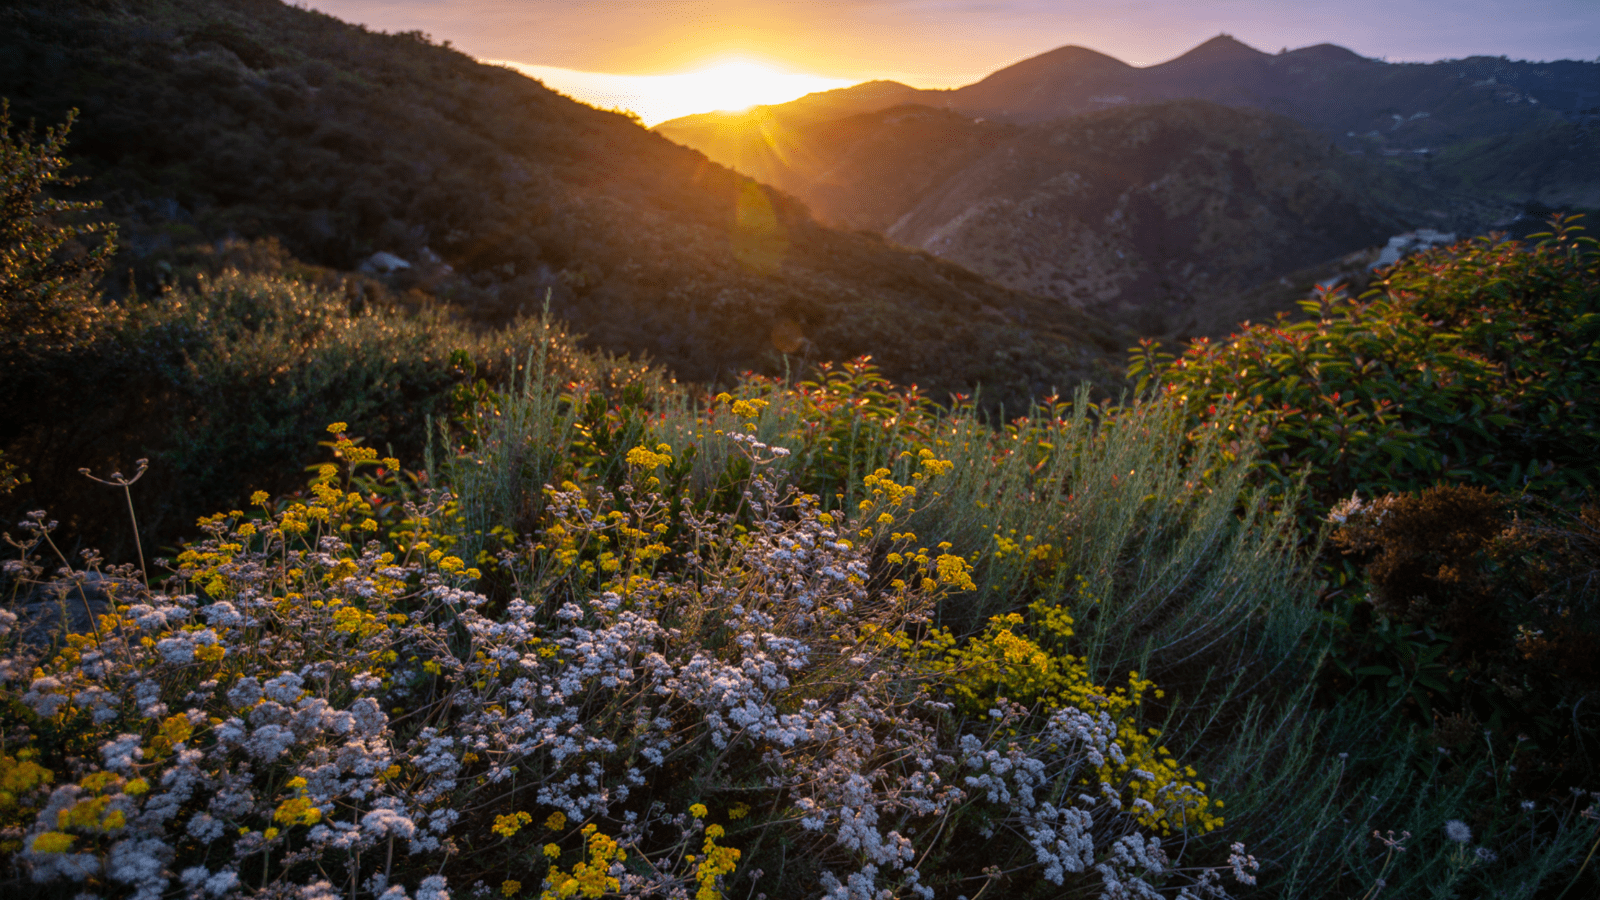 A sunset in the gap between to mountains with purple and yellow flowers illuminated in the foreground.